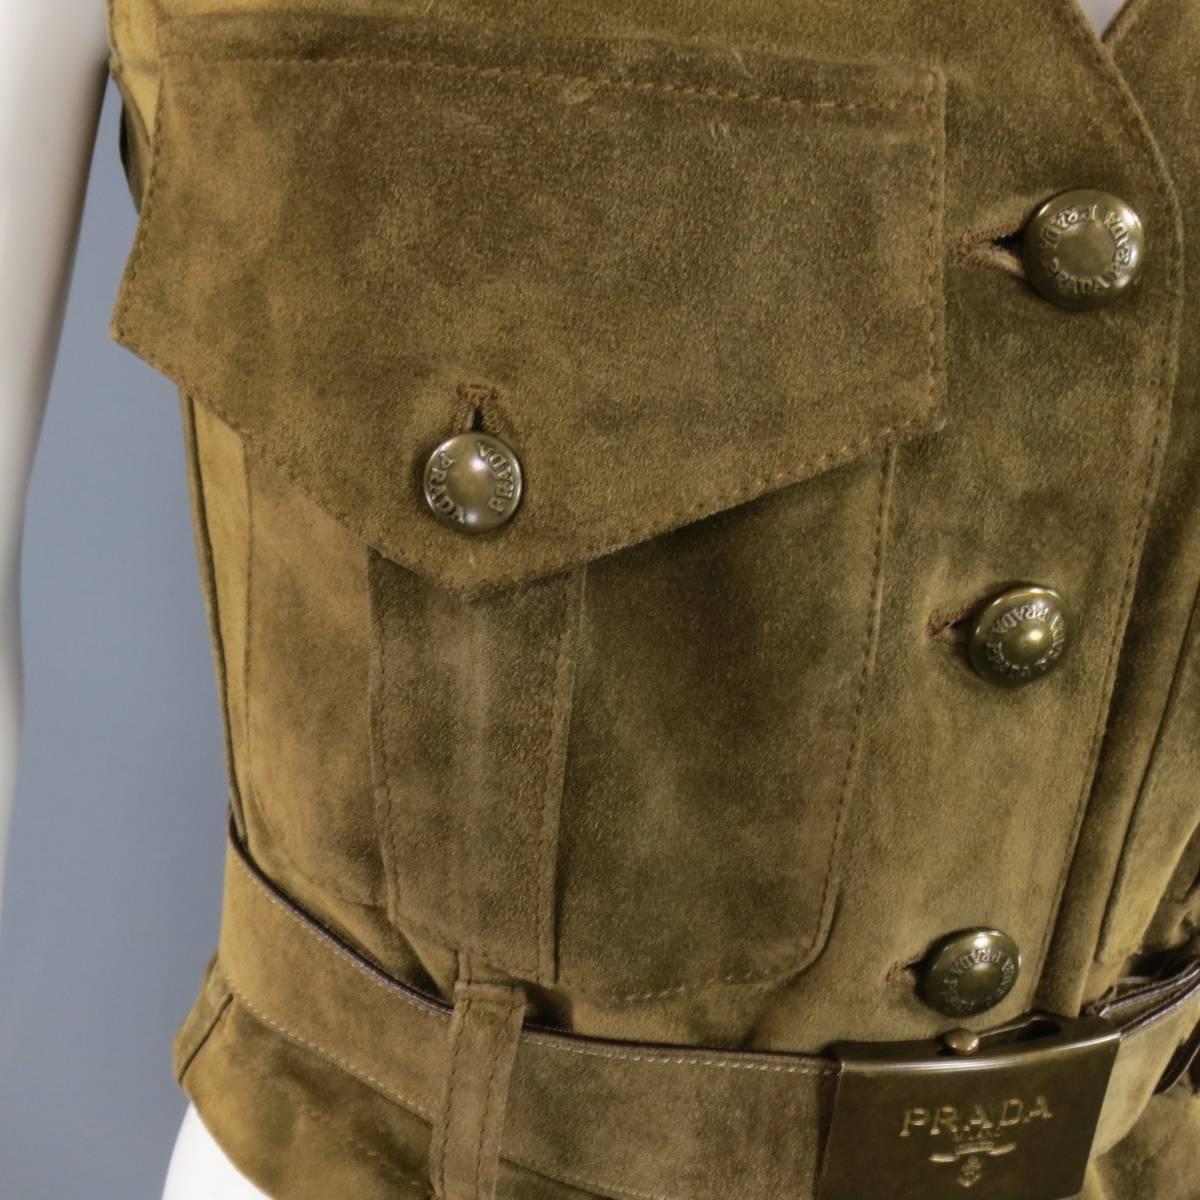 This gorgeous cropped PRADA vest comes in a an olive toned tan suede and features a deep V neckline, oversized military style patch flap pockets, dark gold tone engraved buttons, and matching logo slide buckle belt. Made in Italy.
 
Good Pre-Owned